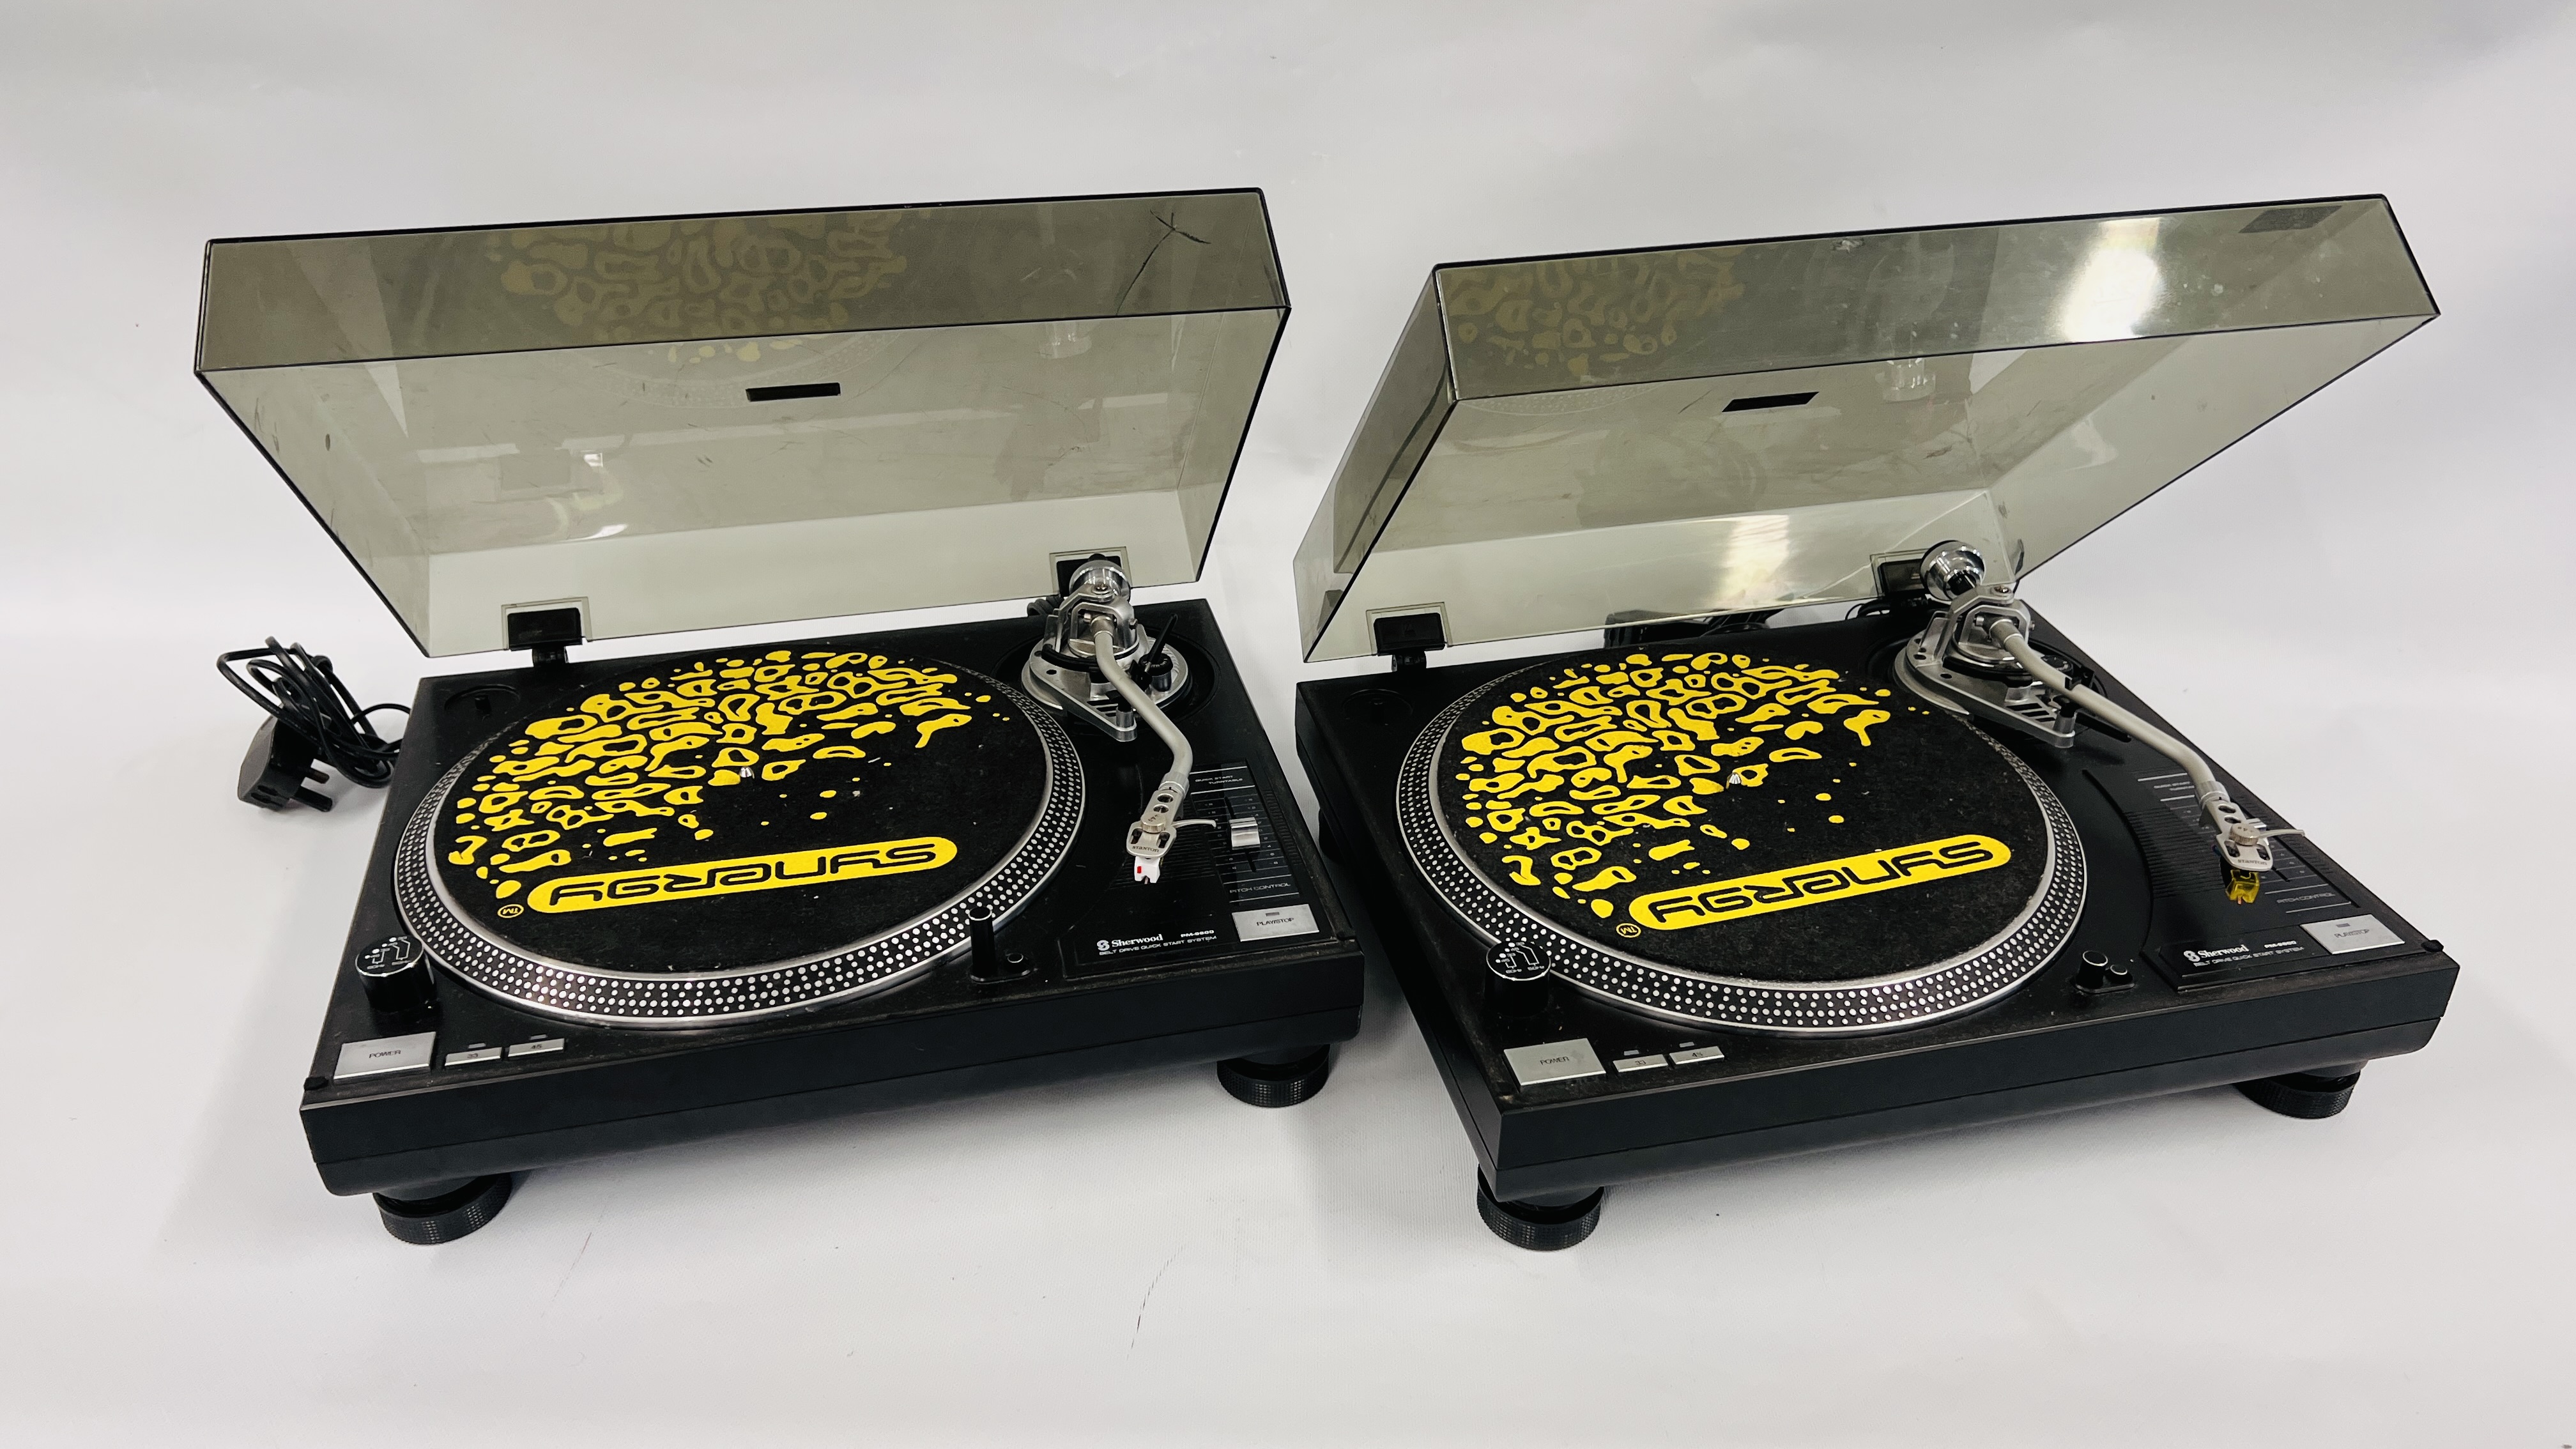 A PAIR OF SHERWOOD PM-9800 BELT DRIVEN RECORD DECKS - SOLD AS SEEN